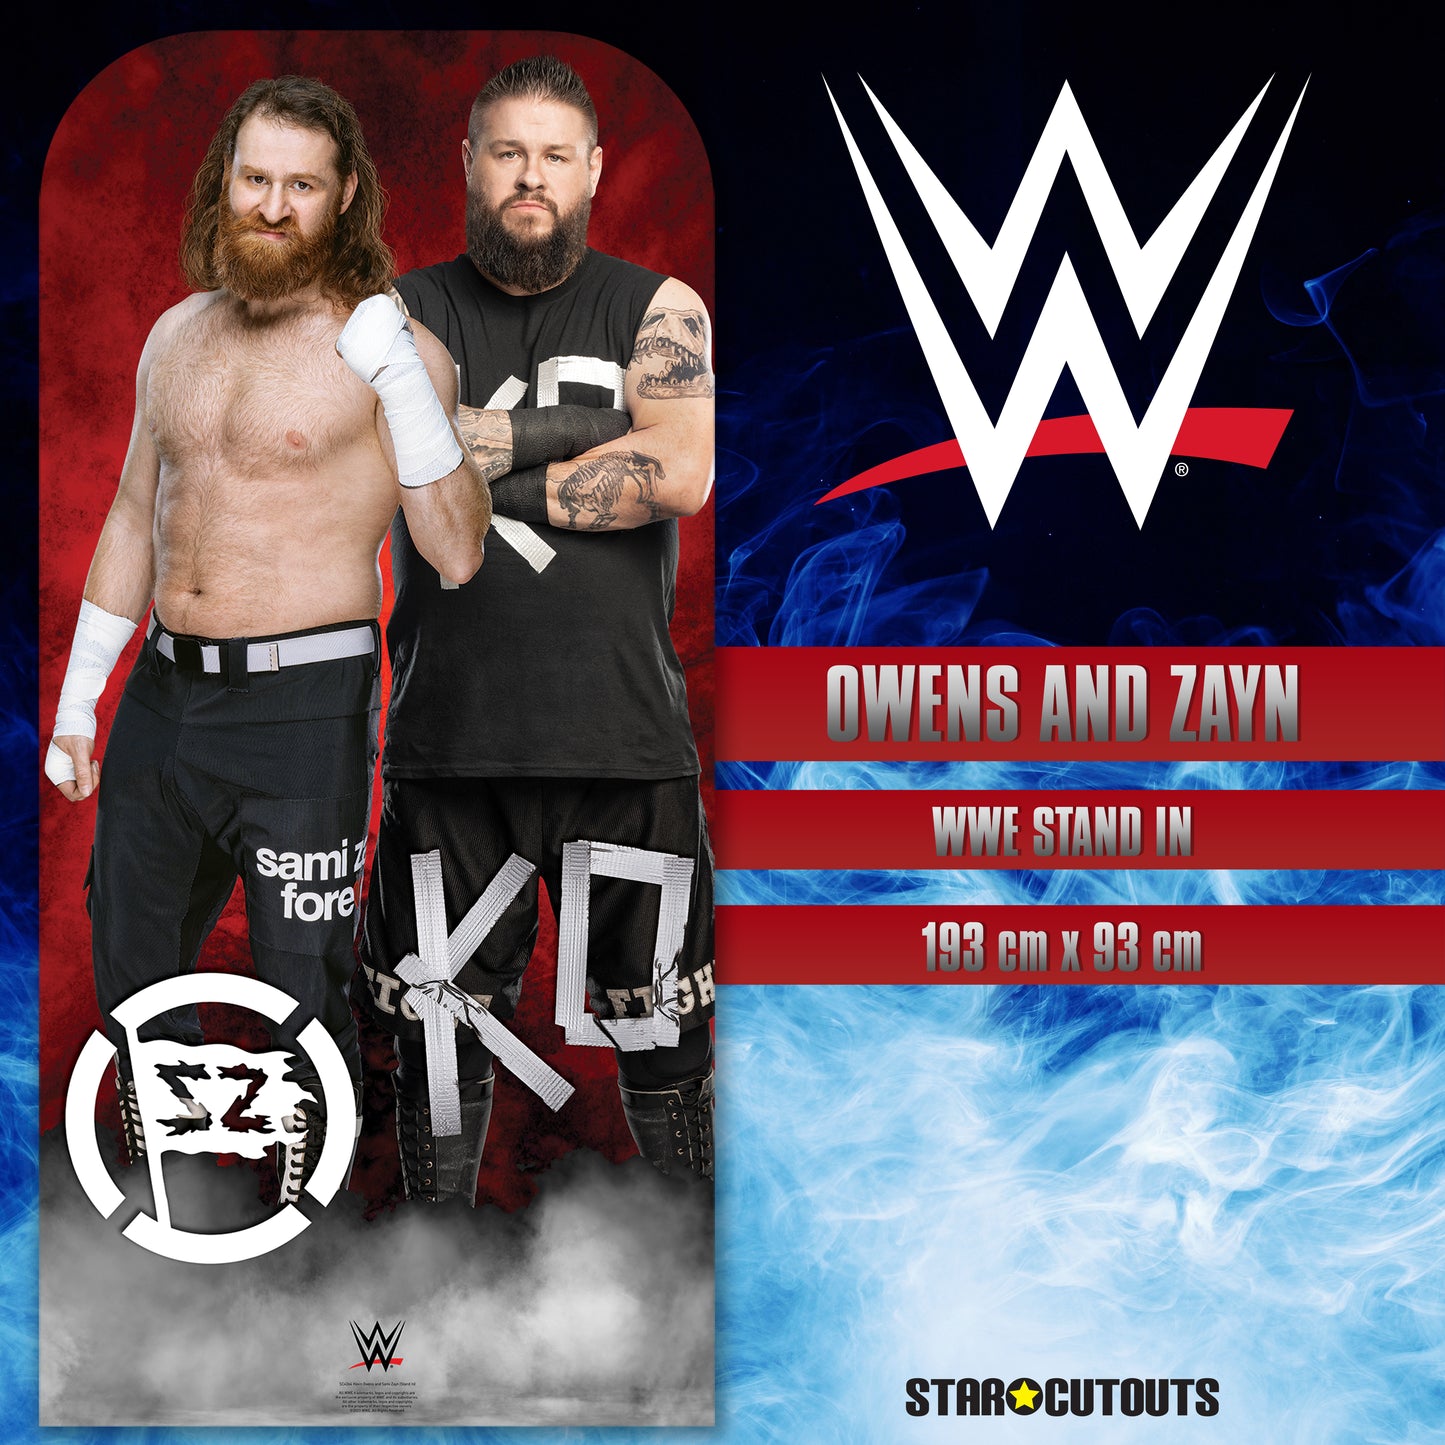 SC4364 Owens and Zayn WWE Stand In Cardboard Cut Out Height 193cm